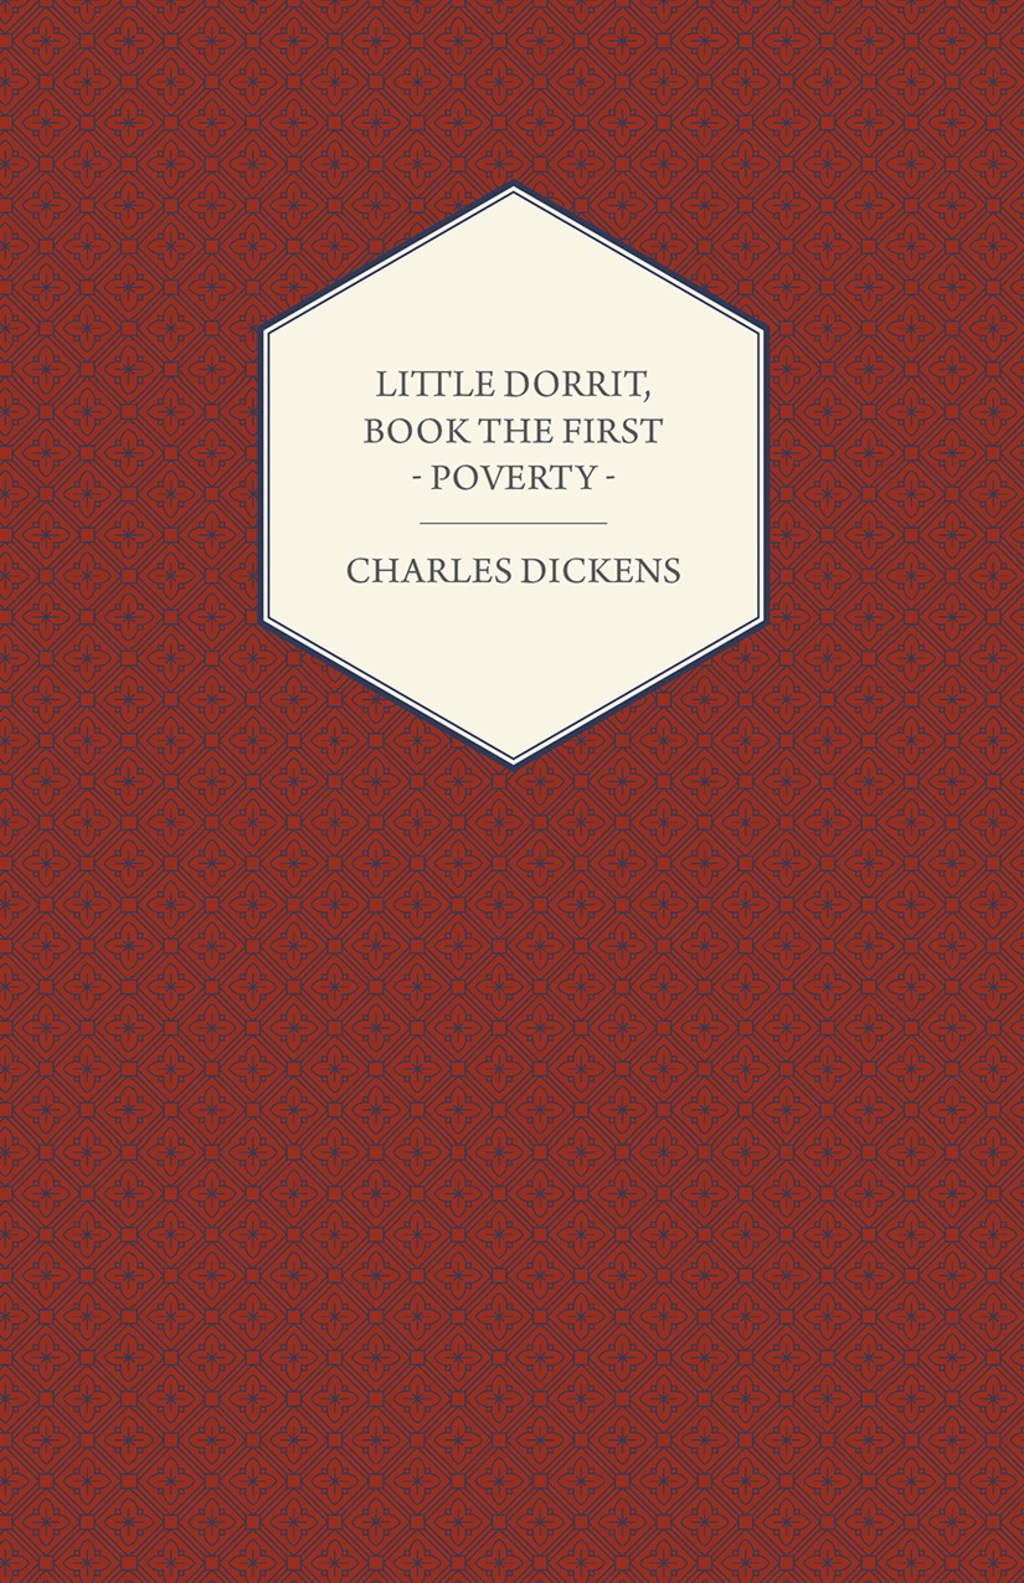 Little Dorrit  Book the First - Poverty (eBook) - Charles Dickens